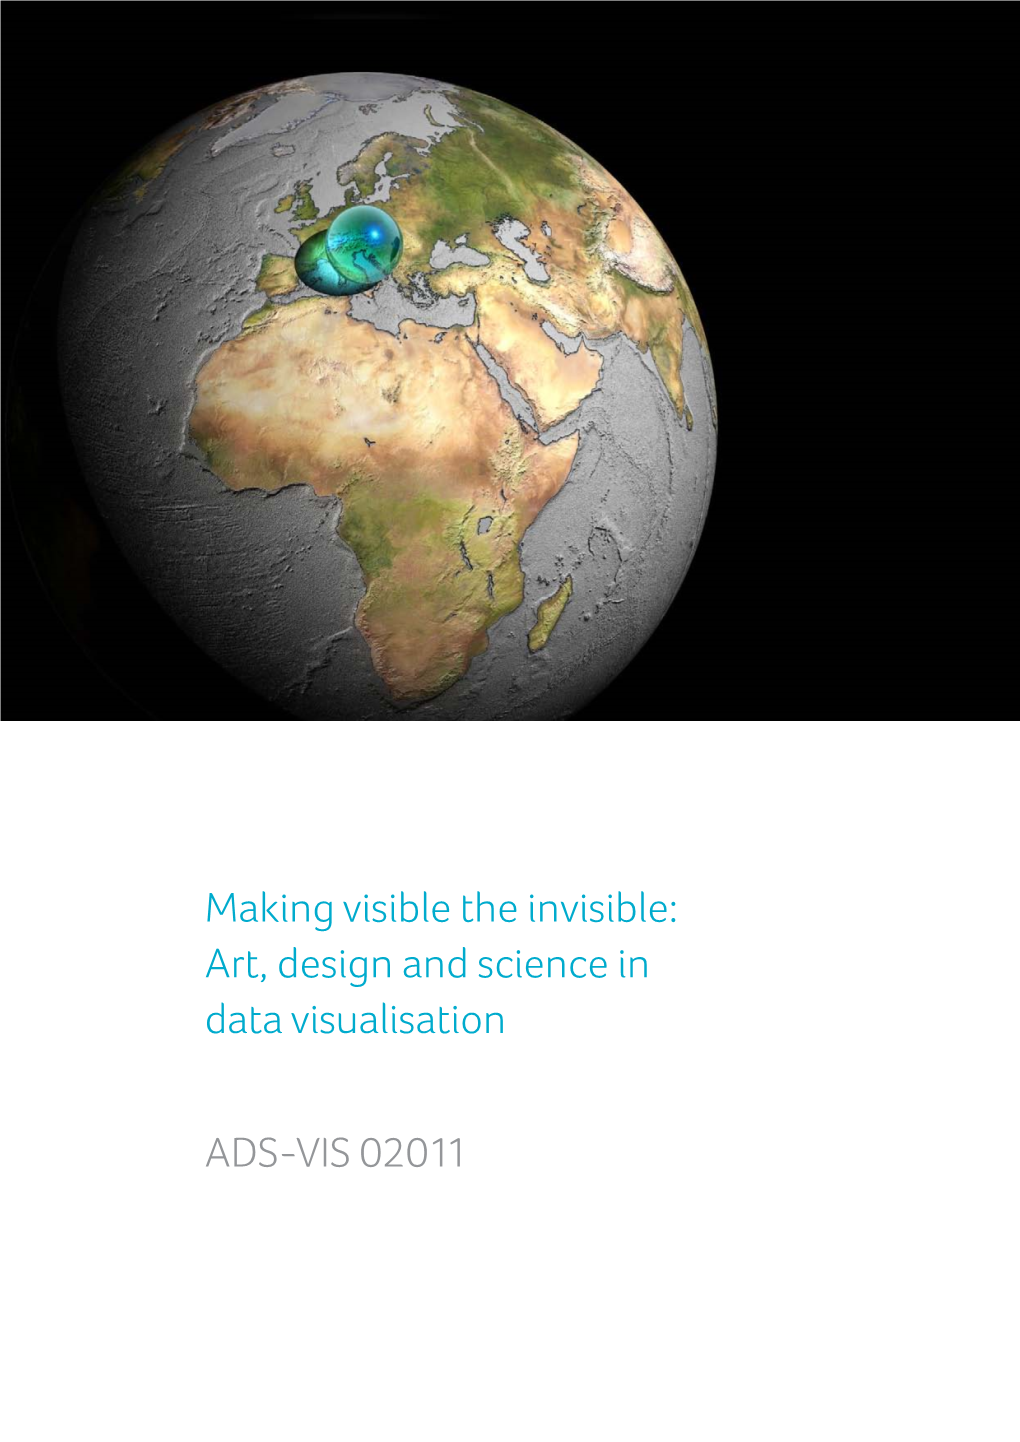 Making Visible the Invisible: Art, Design and Science in Data Visualisation